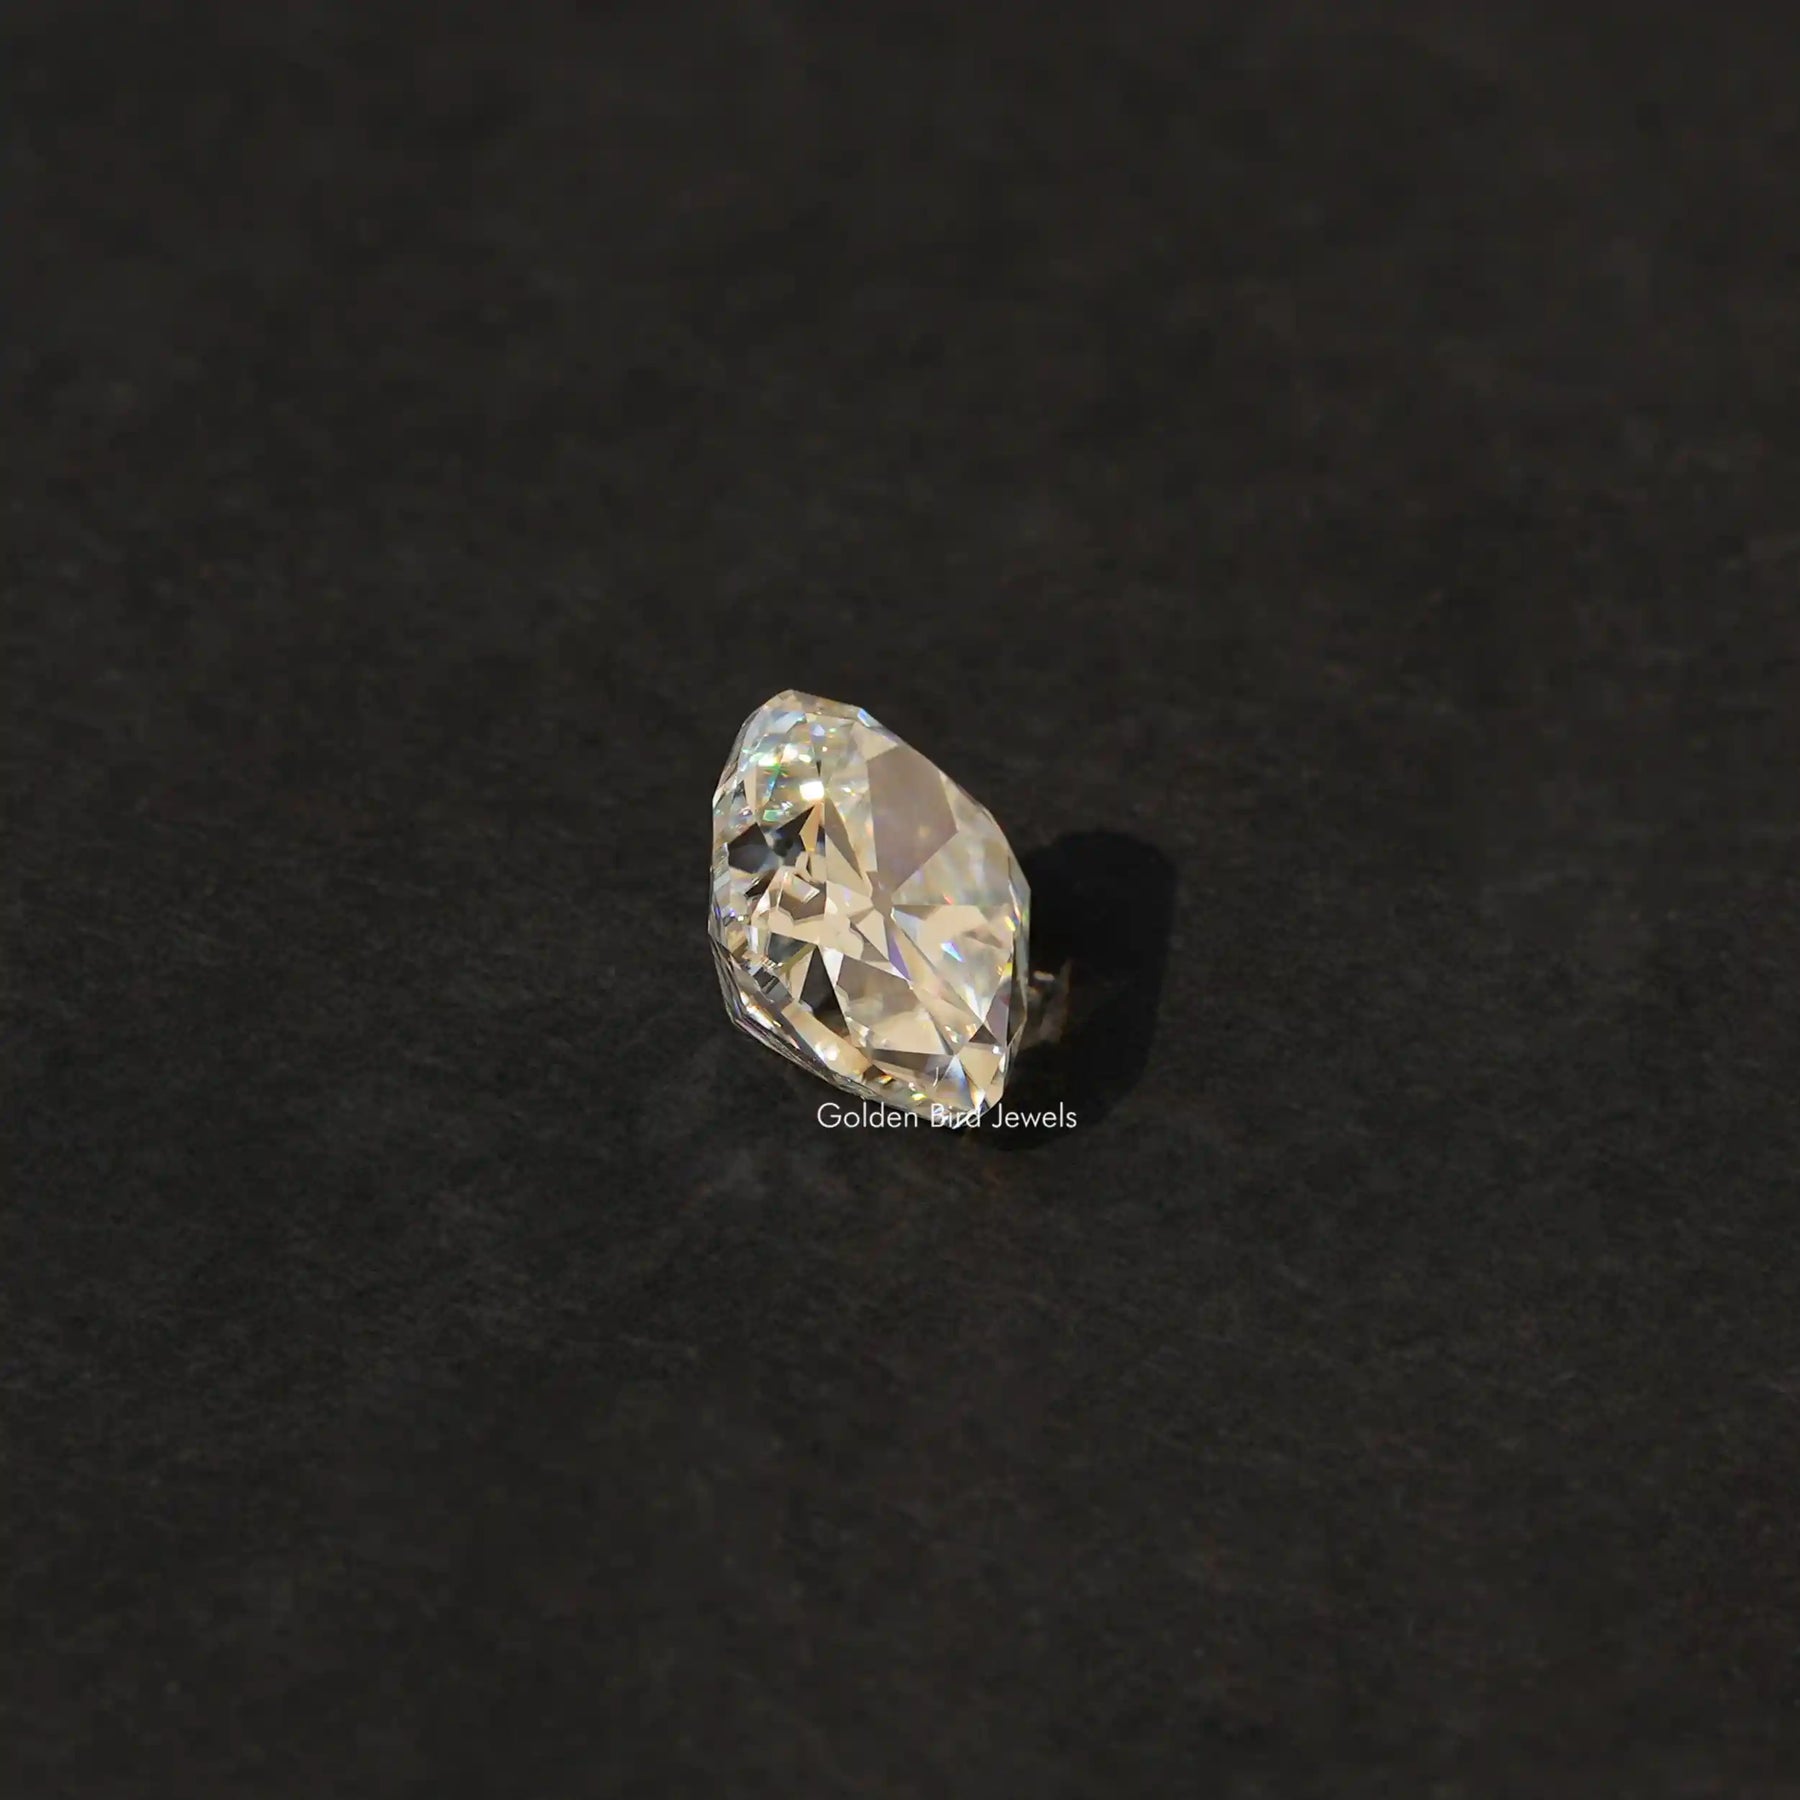 [Side view of cushion cut loose moissanite]-[Golden Bird Jewels]